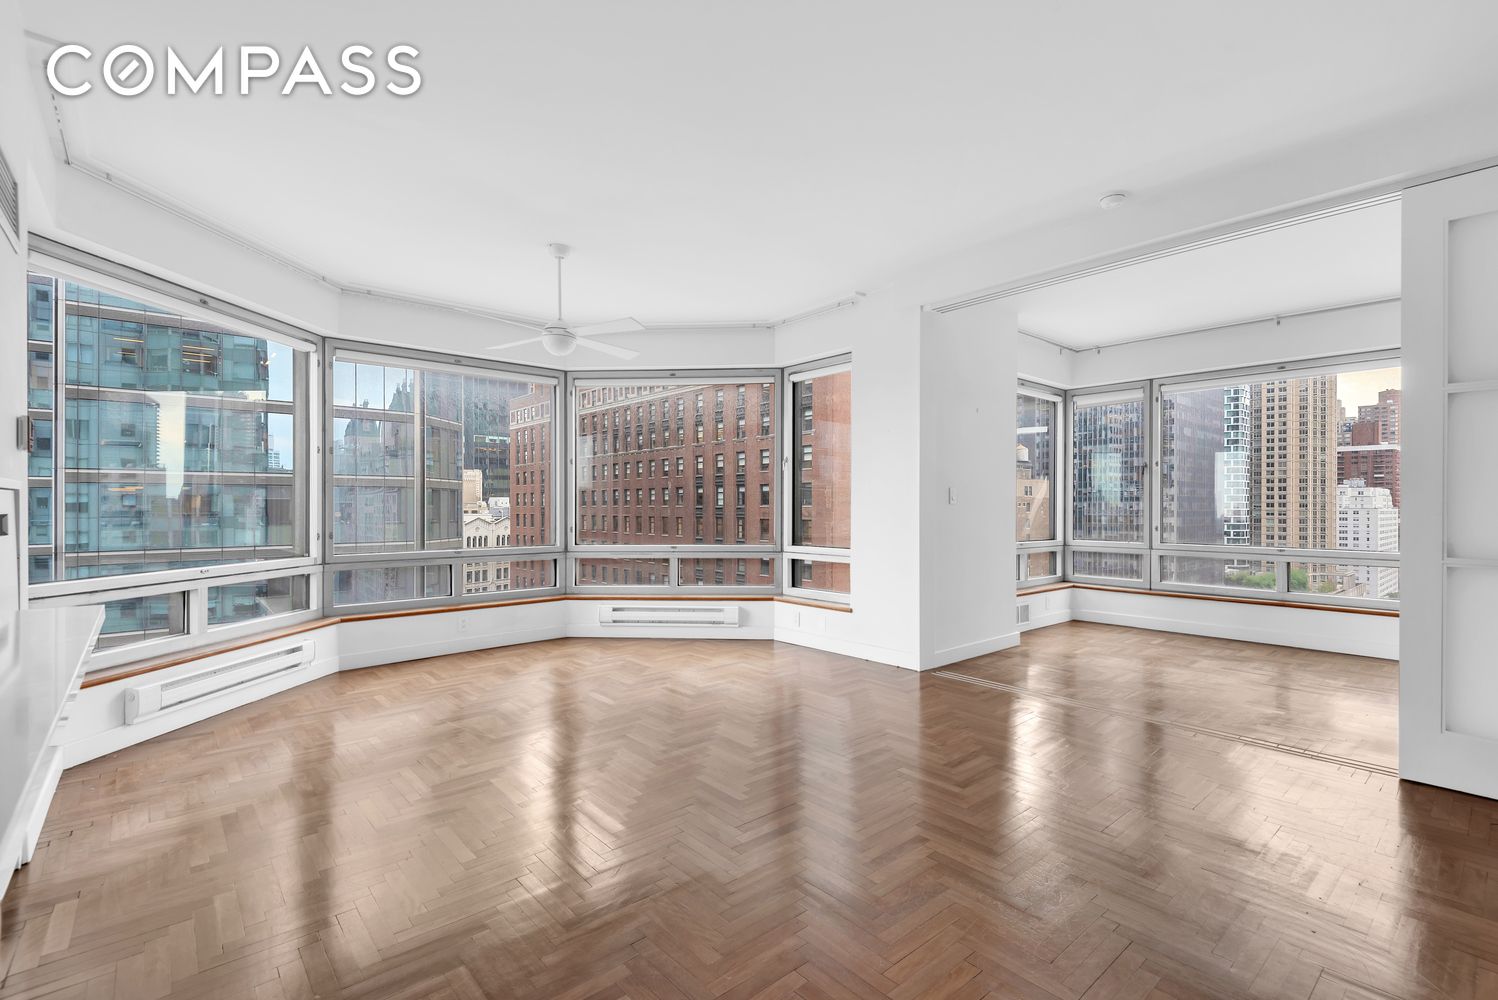 301 West 57th Street 11D, Hell S Kitchen, Midtown West, NYC - 2 Bedrooms  
2 Bathrooms  
5 Rooms - 